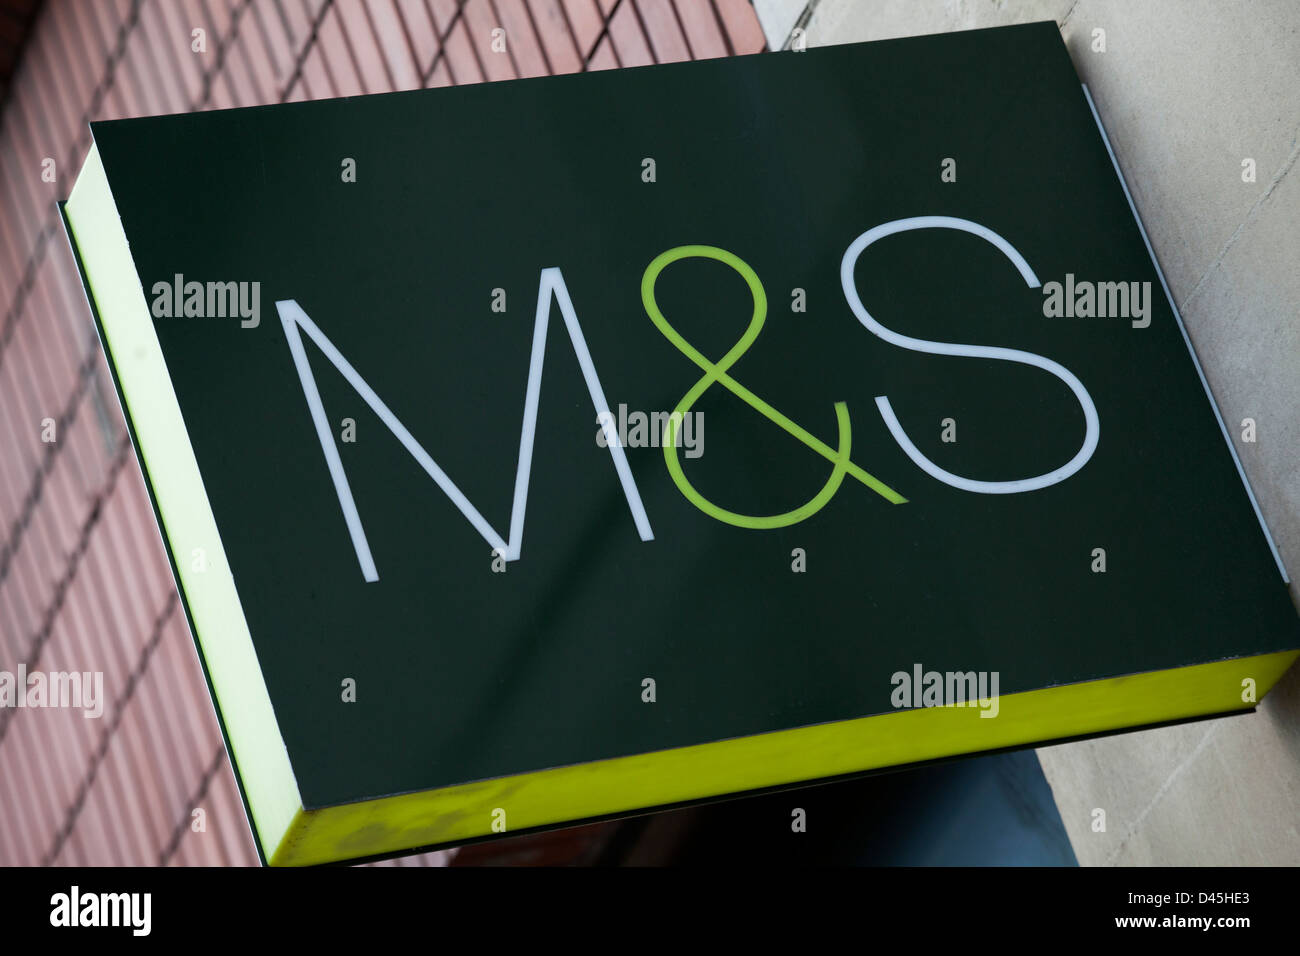 Sign for department store and supermarket chain Marks and Spencer. Stock Photo